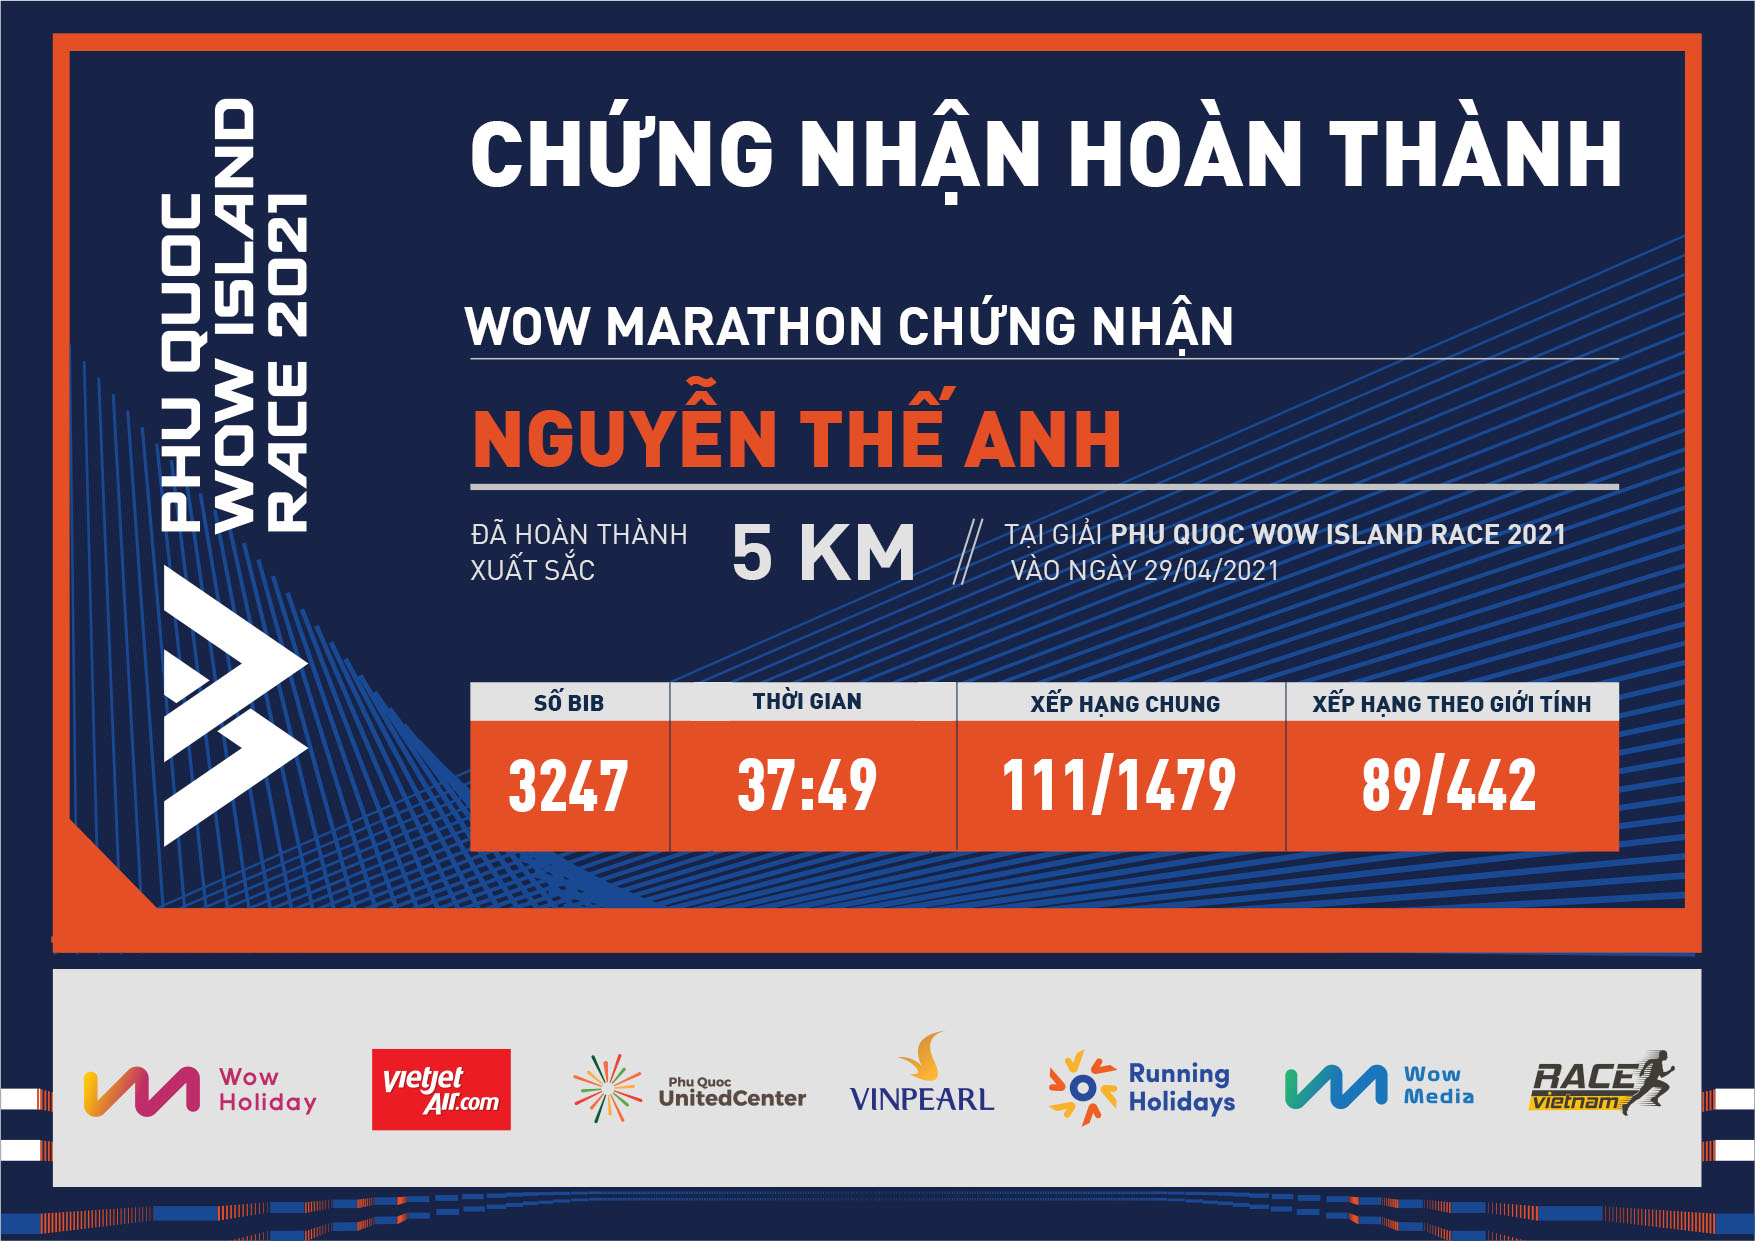 3247 - Nguyễn Thế Anh